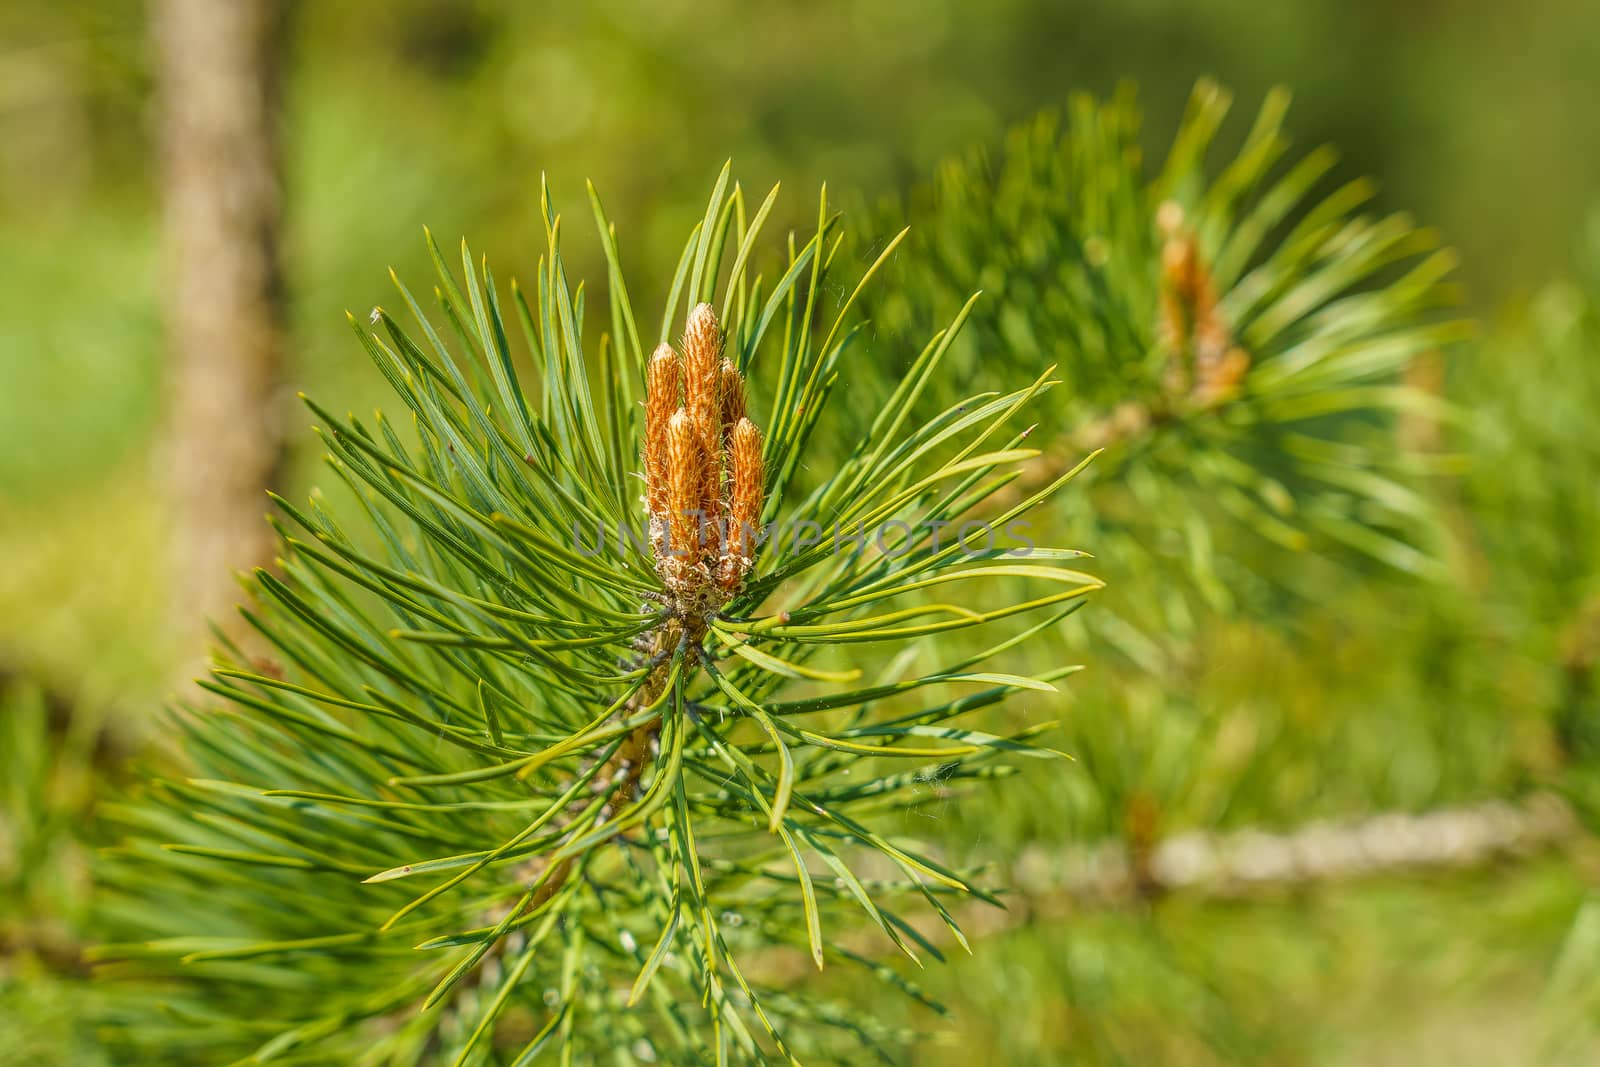 flowering pine branch with a flower ovary and long green needles